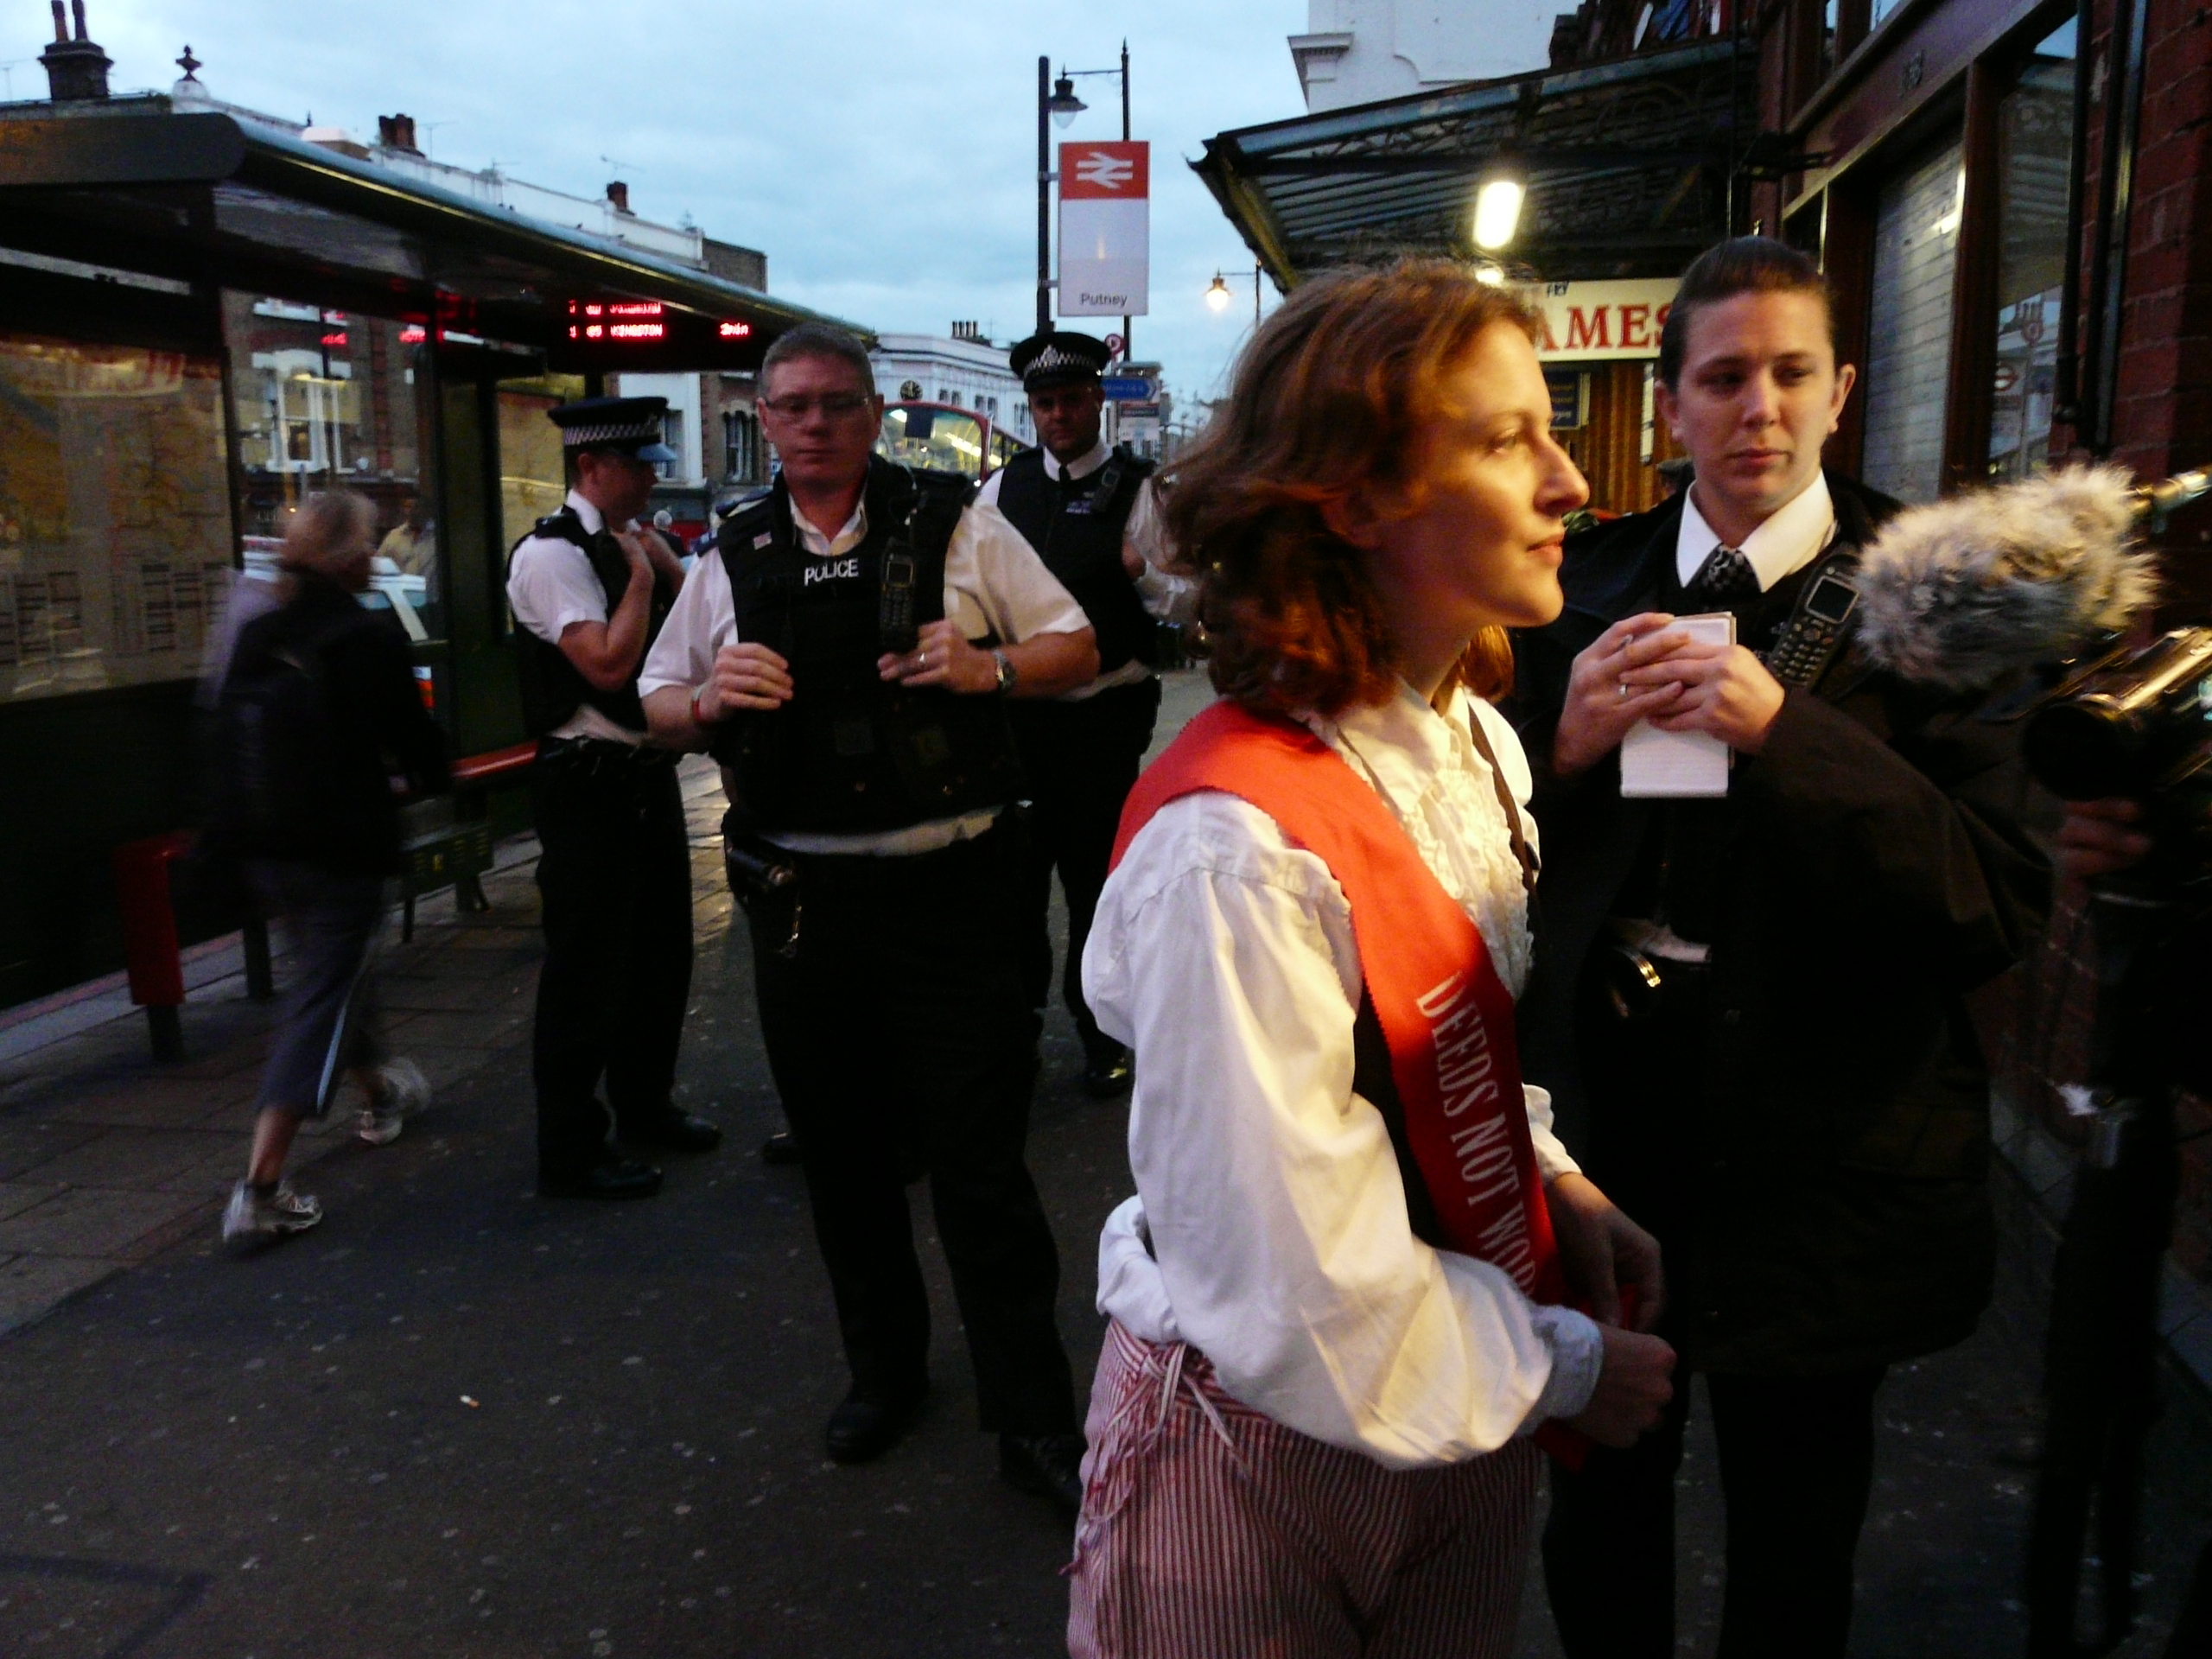 Climate Suffragette, Deborah Grayson, is questioned by police.